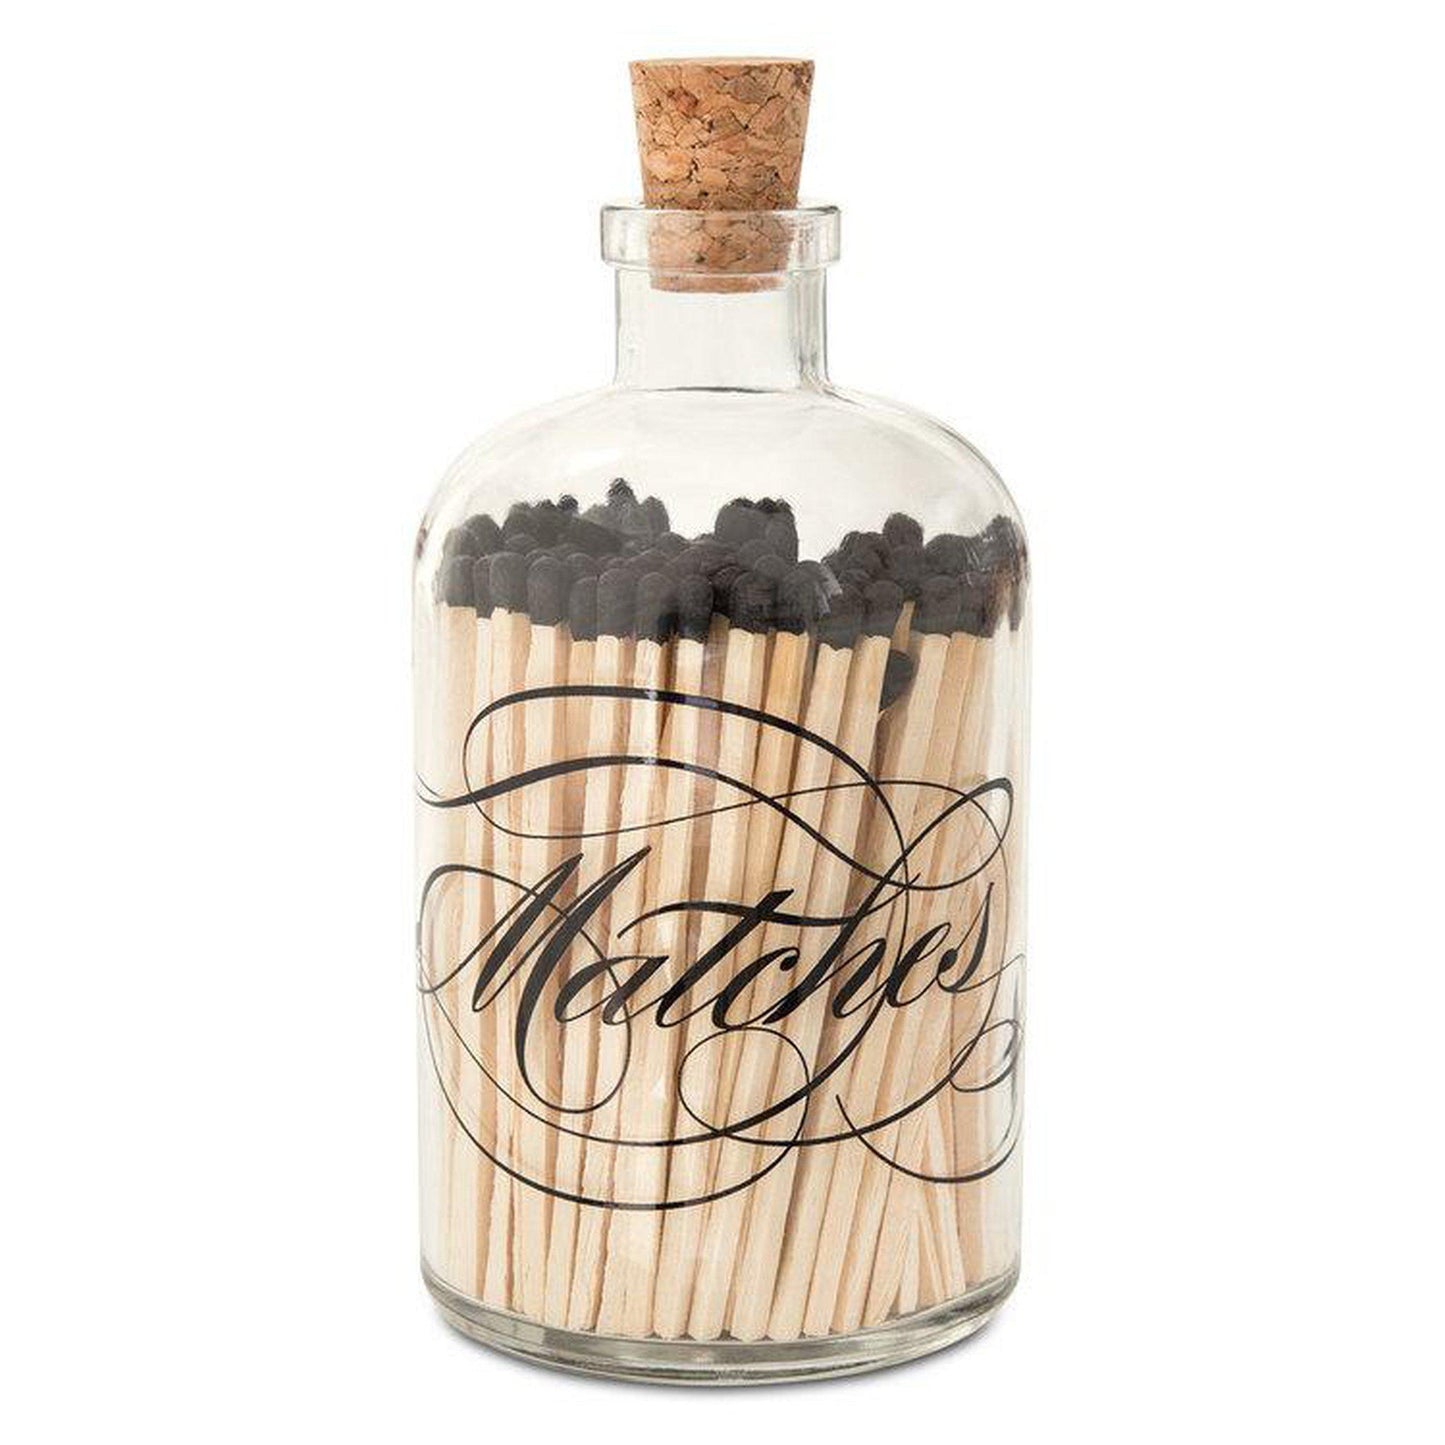 Calligraphy "Matches" Bottle